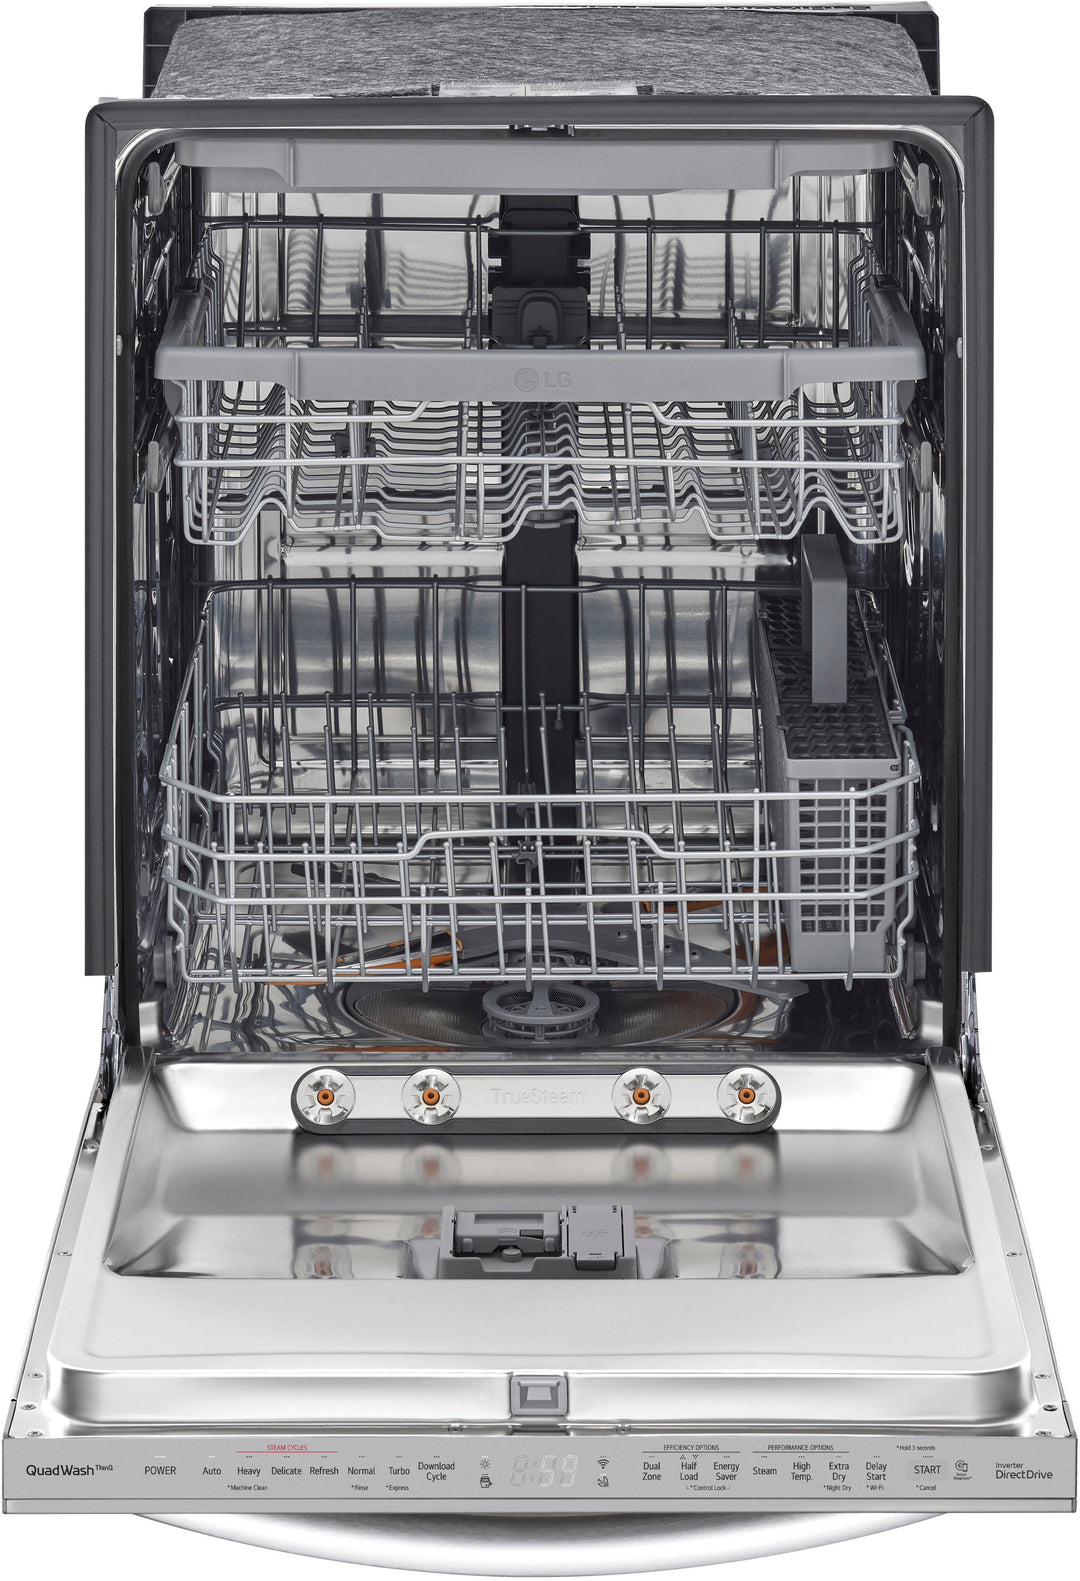 LG - 24" Top Control Smart Built-In Stainless Steel Tub Dishwasher with 3rd Rack, QuadWash and 46dba - Stainless steel_6